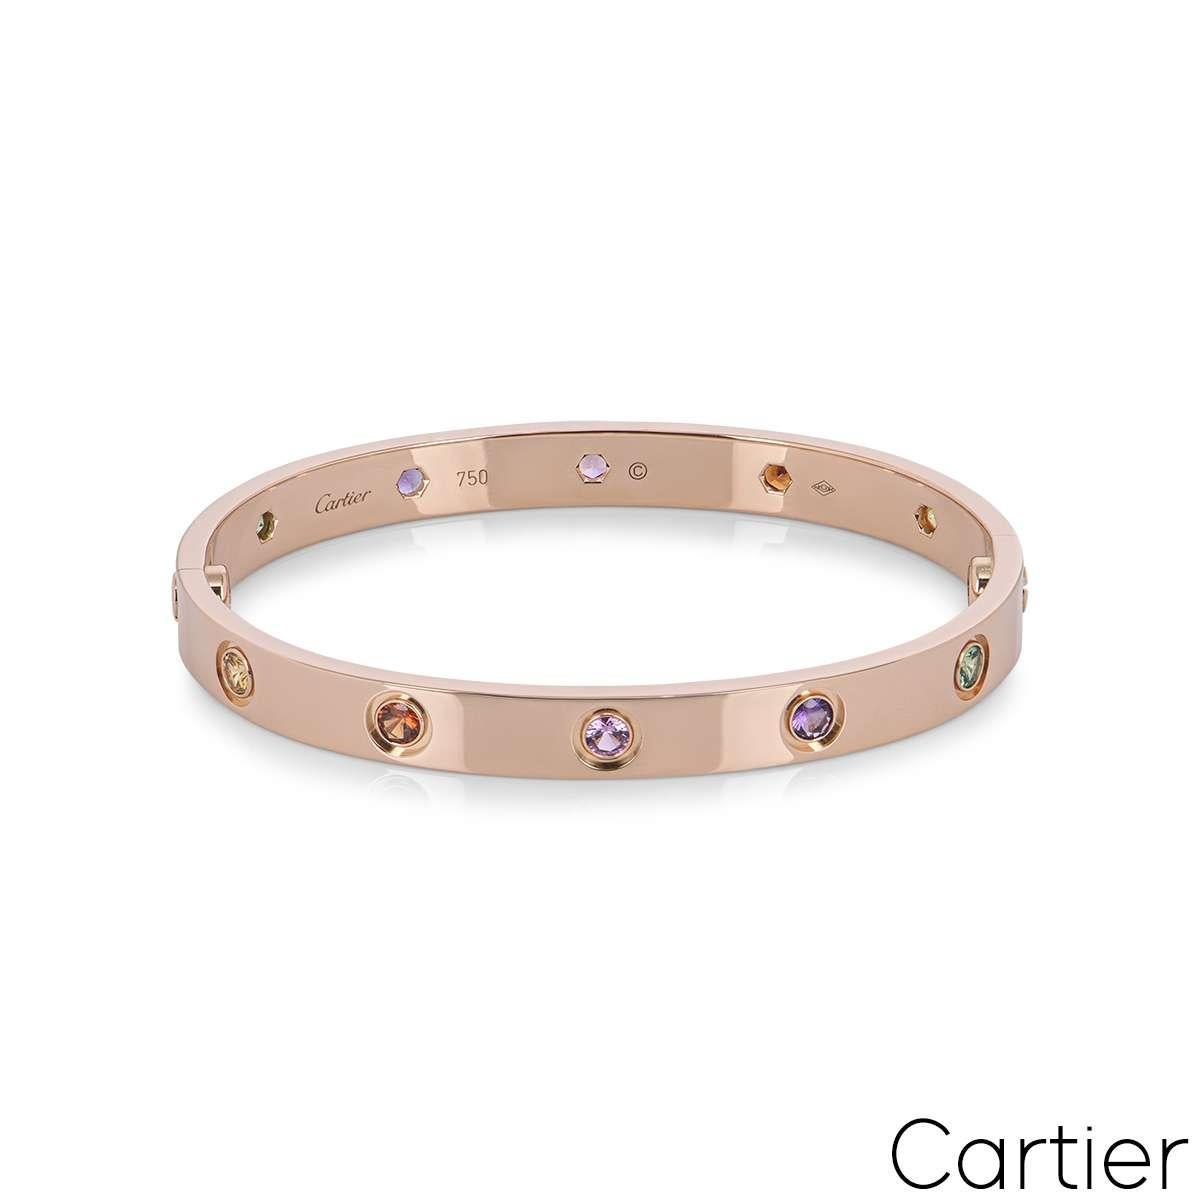 An 18k rose gold bracelet by Cartier, from their Love collection. Set with 10 coloured stones, including rose and yellow sapphires, green and orange garnets and amethysts. This bracelet features the new style screw system and is a size 17 with a